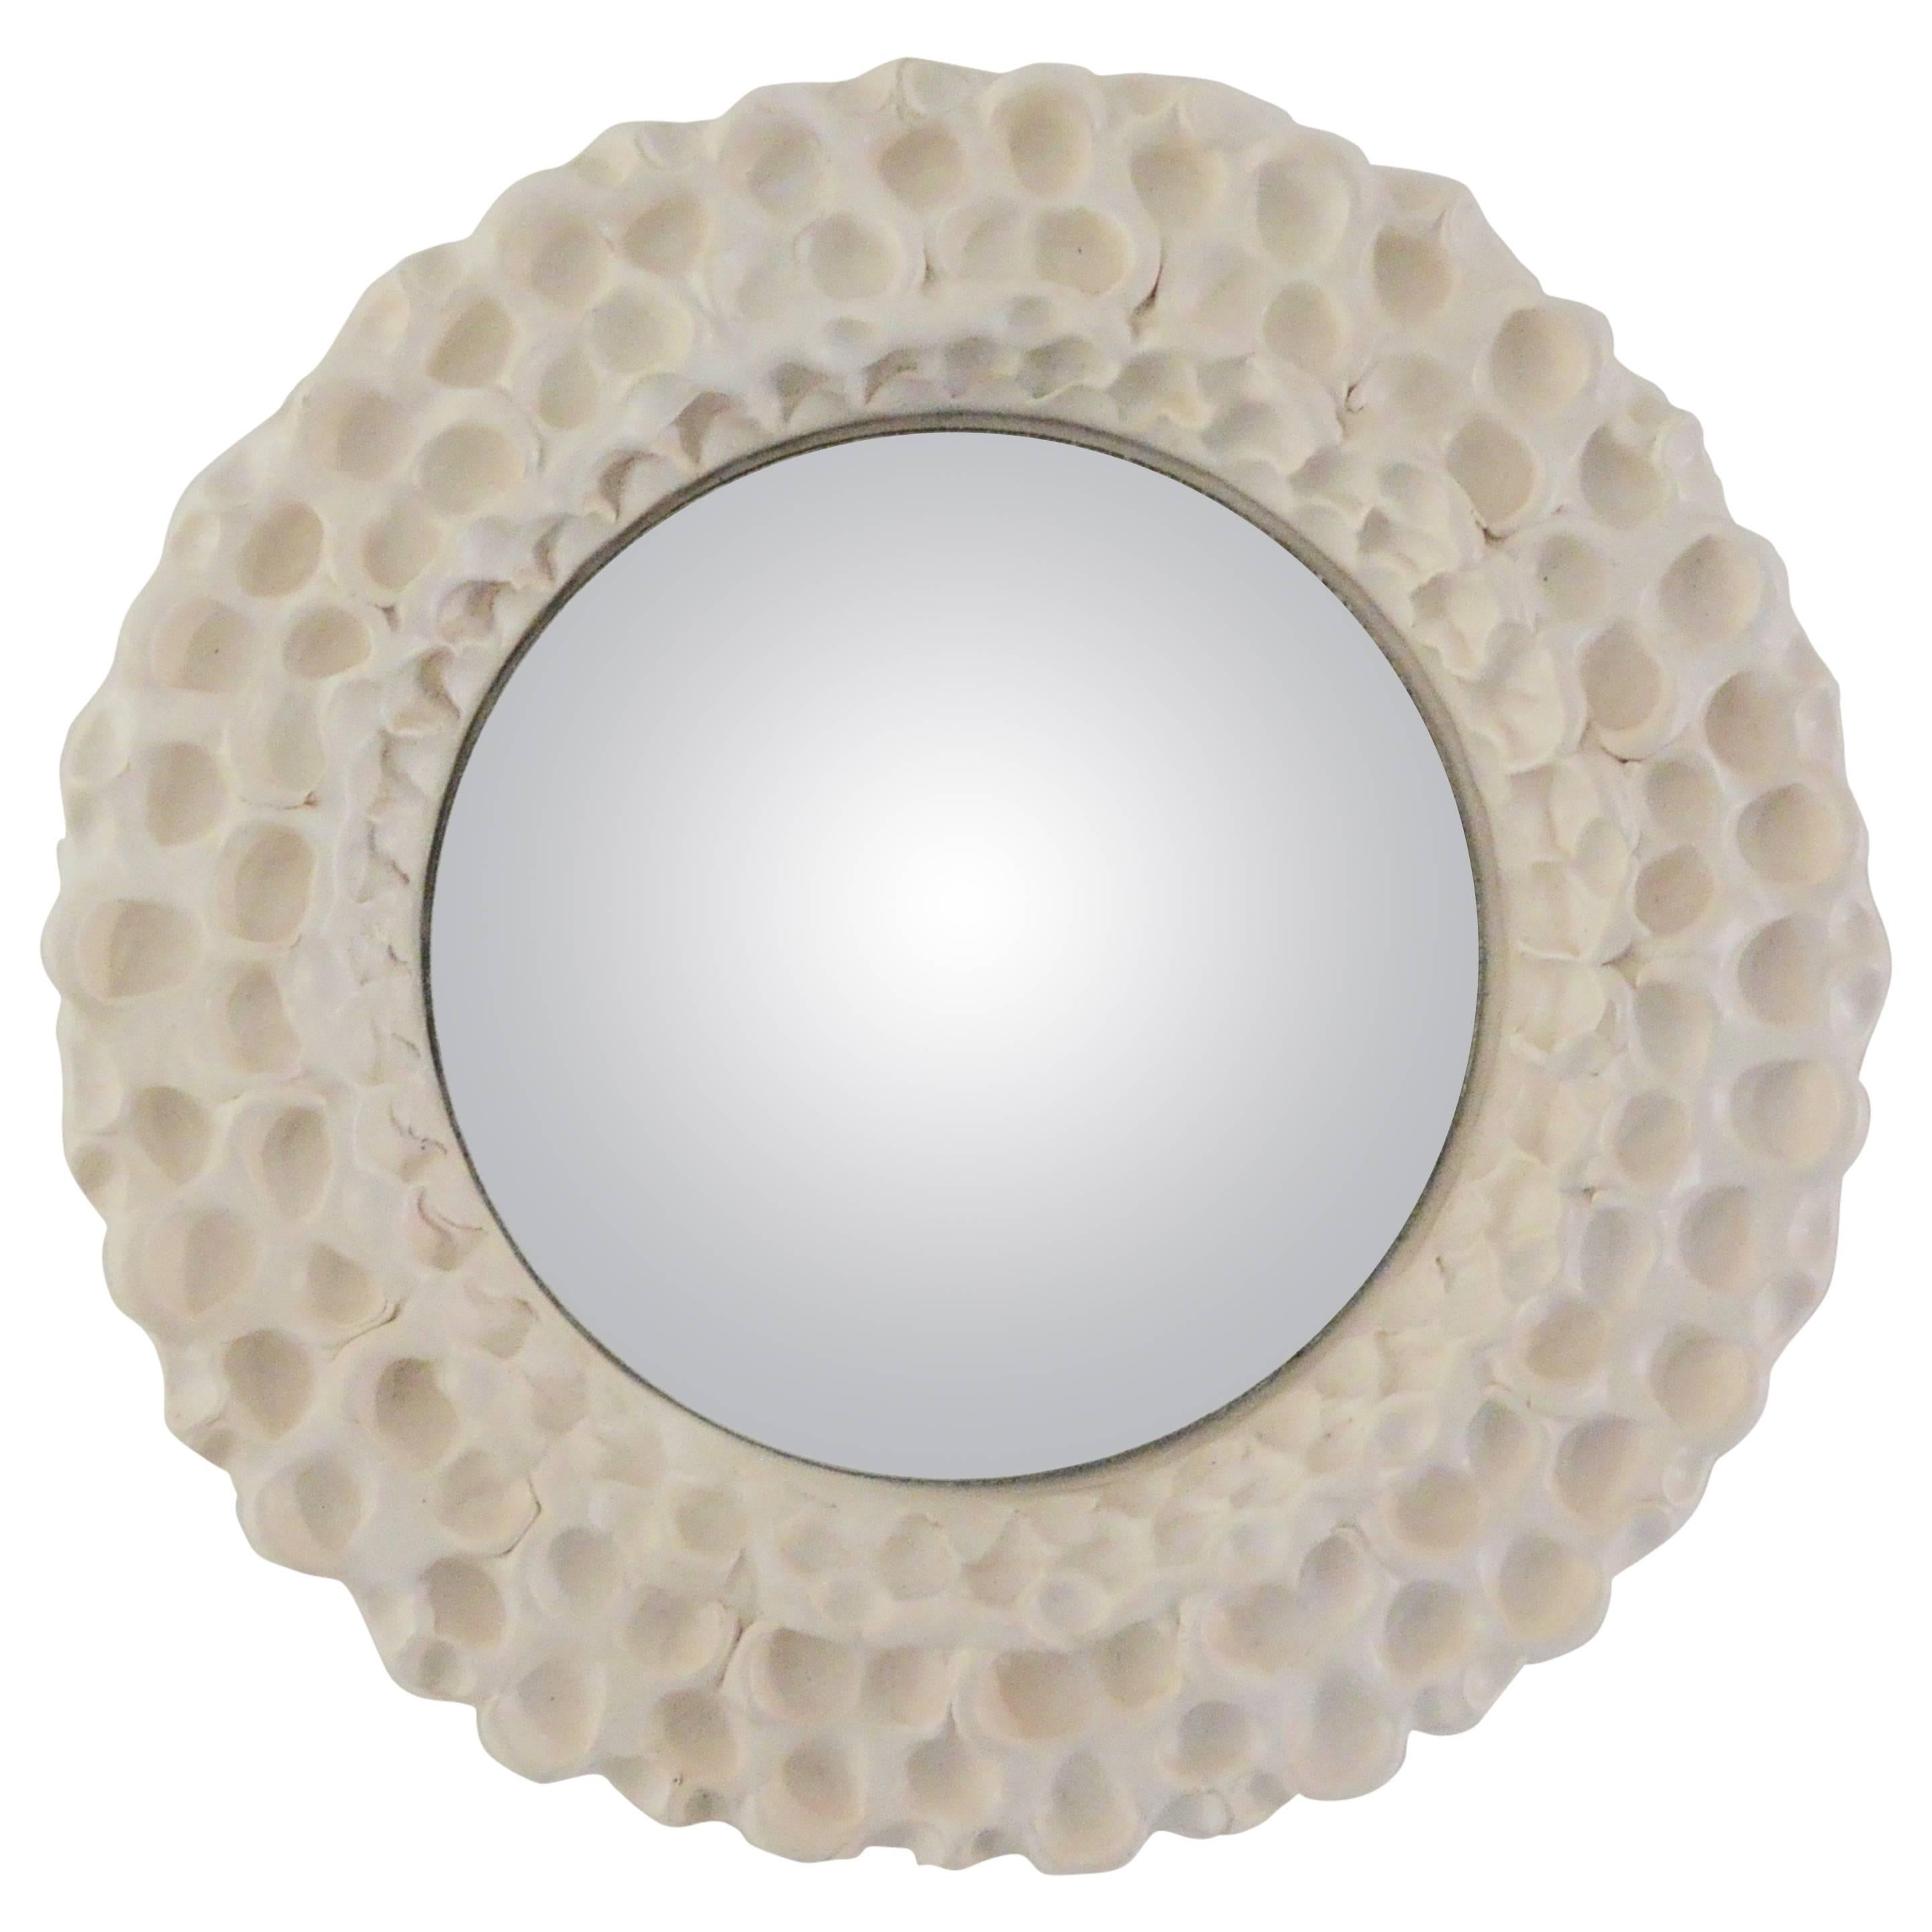 Ceramic Convex Mirror by Atelier Buffile, France, circa 1980 For Sale